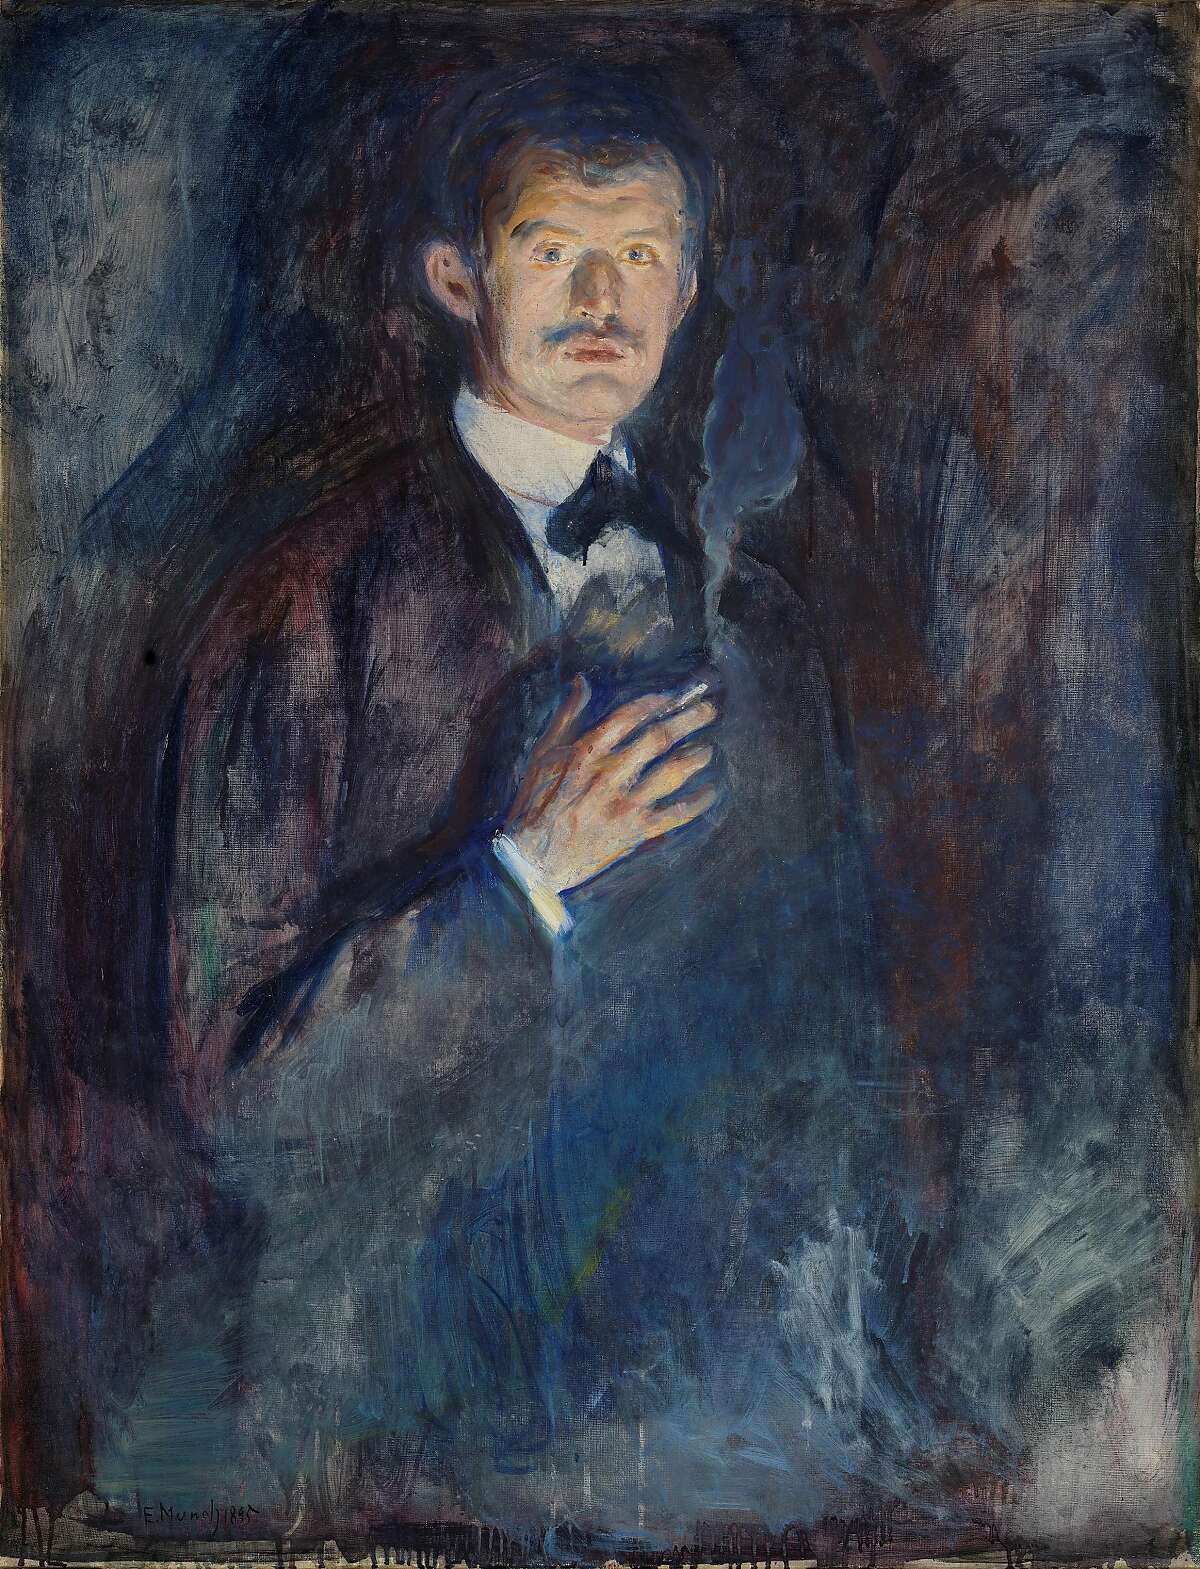 Edvard Munch, Self-Portrait with Cigarette, 1895; 43 � x 33 11/16 in.; The National Museum of Art, Architecture and Design, Oslo